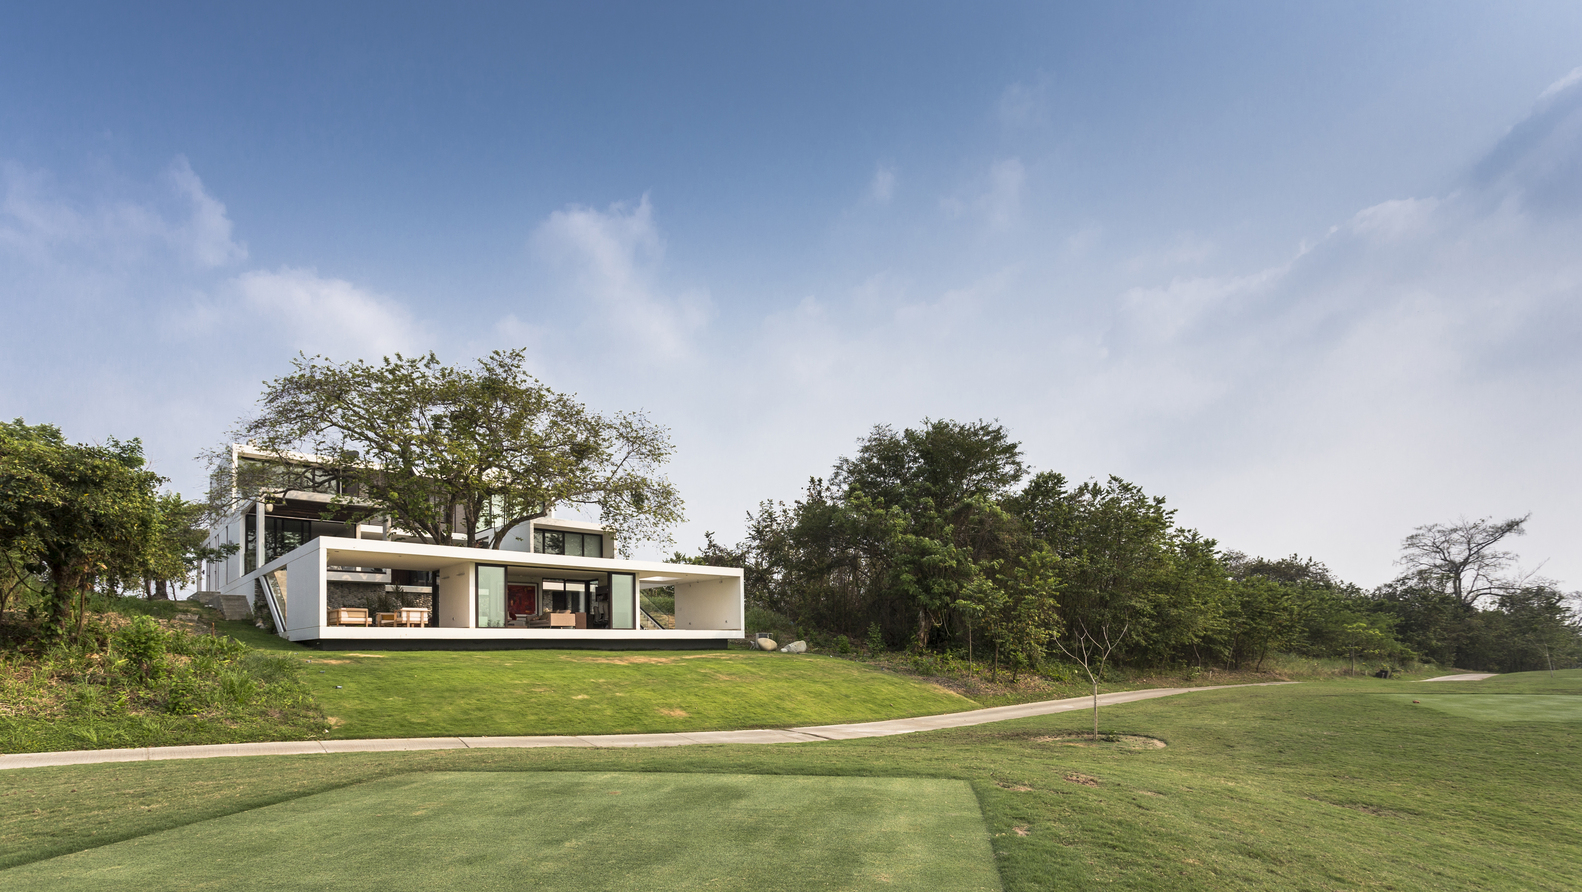 General 1582x892 house architecture modern golf course